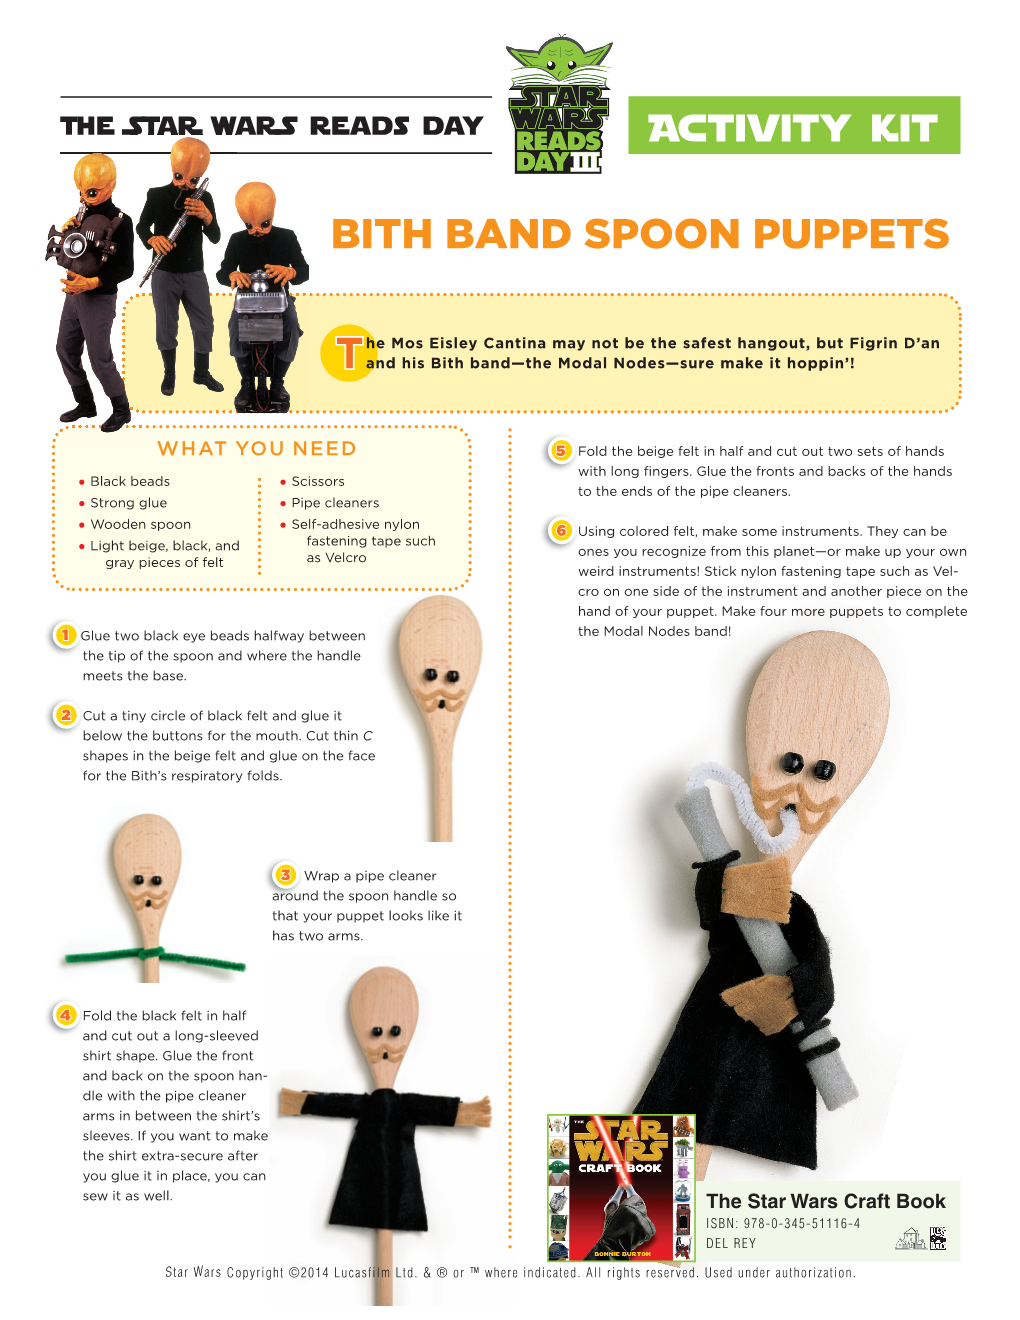 Bith Band Spoon Puppets